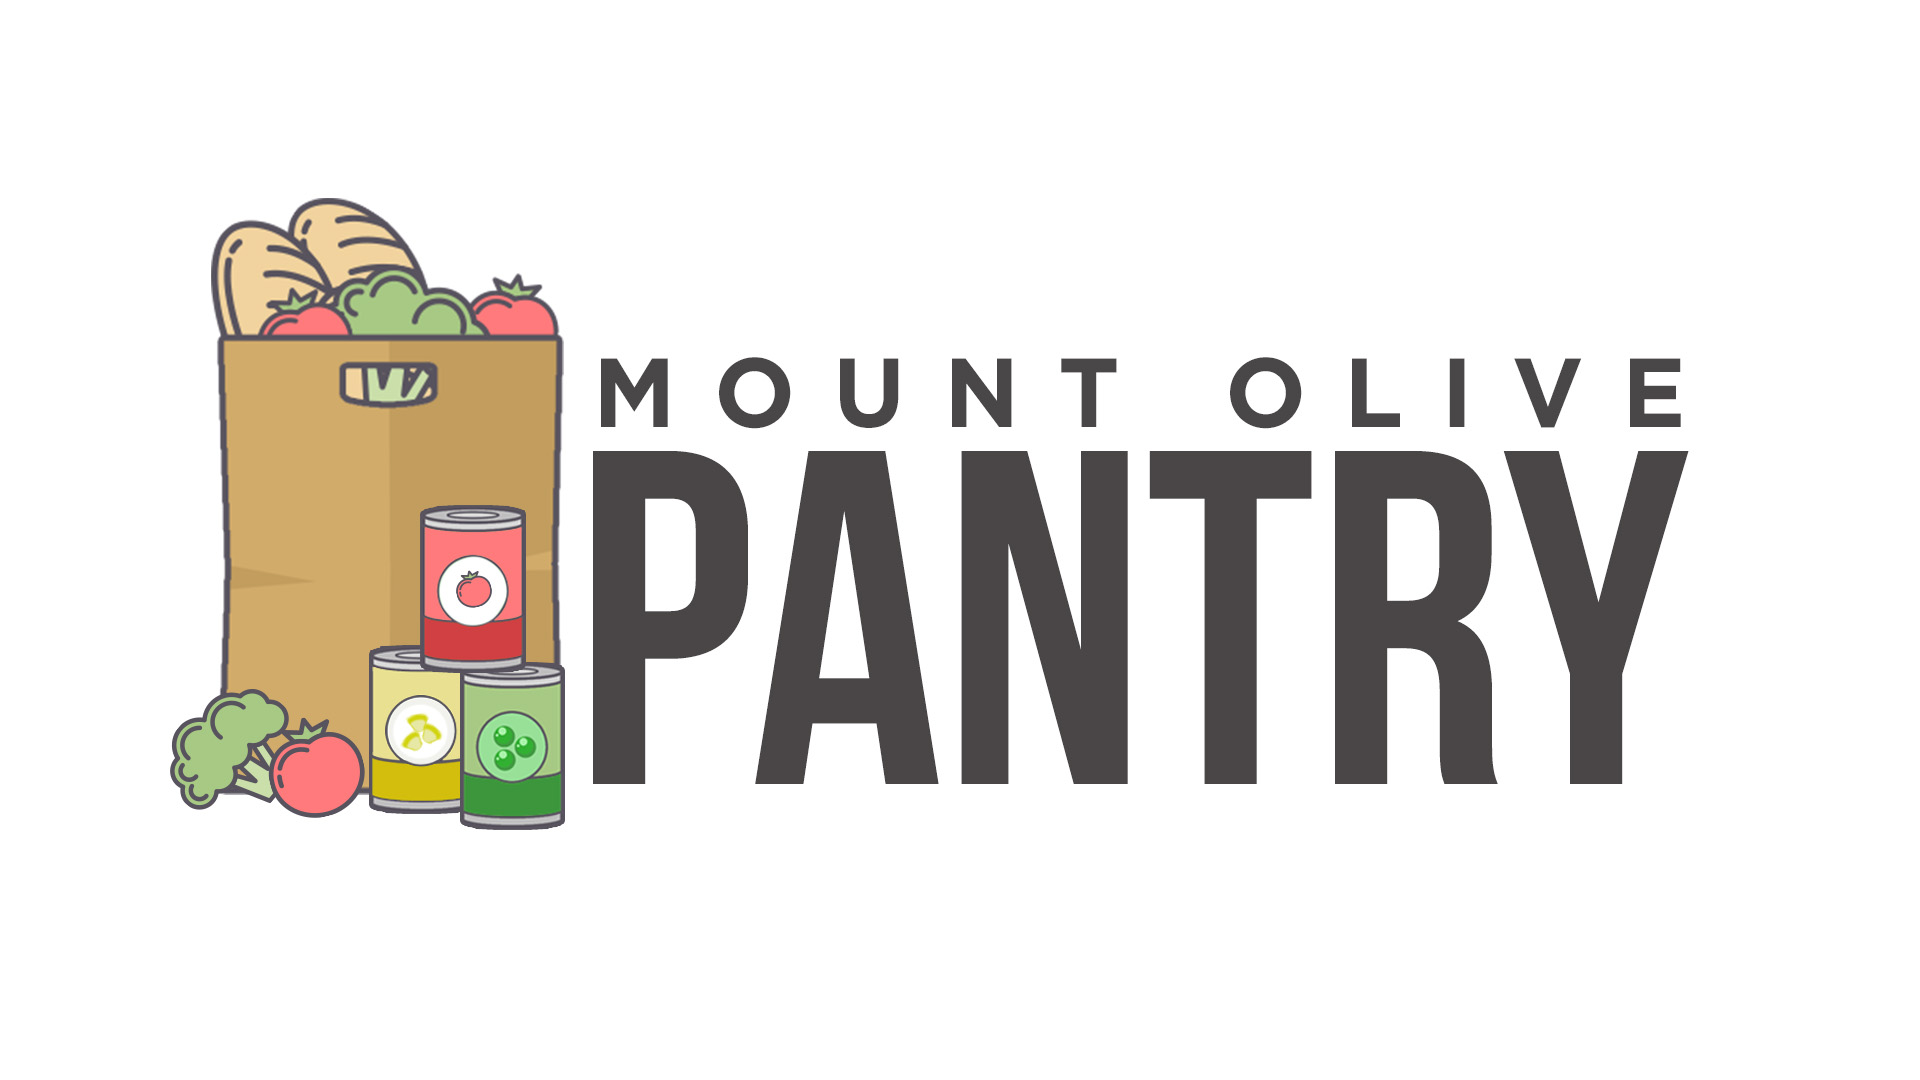 Mount Olive Pantry